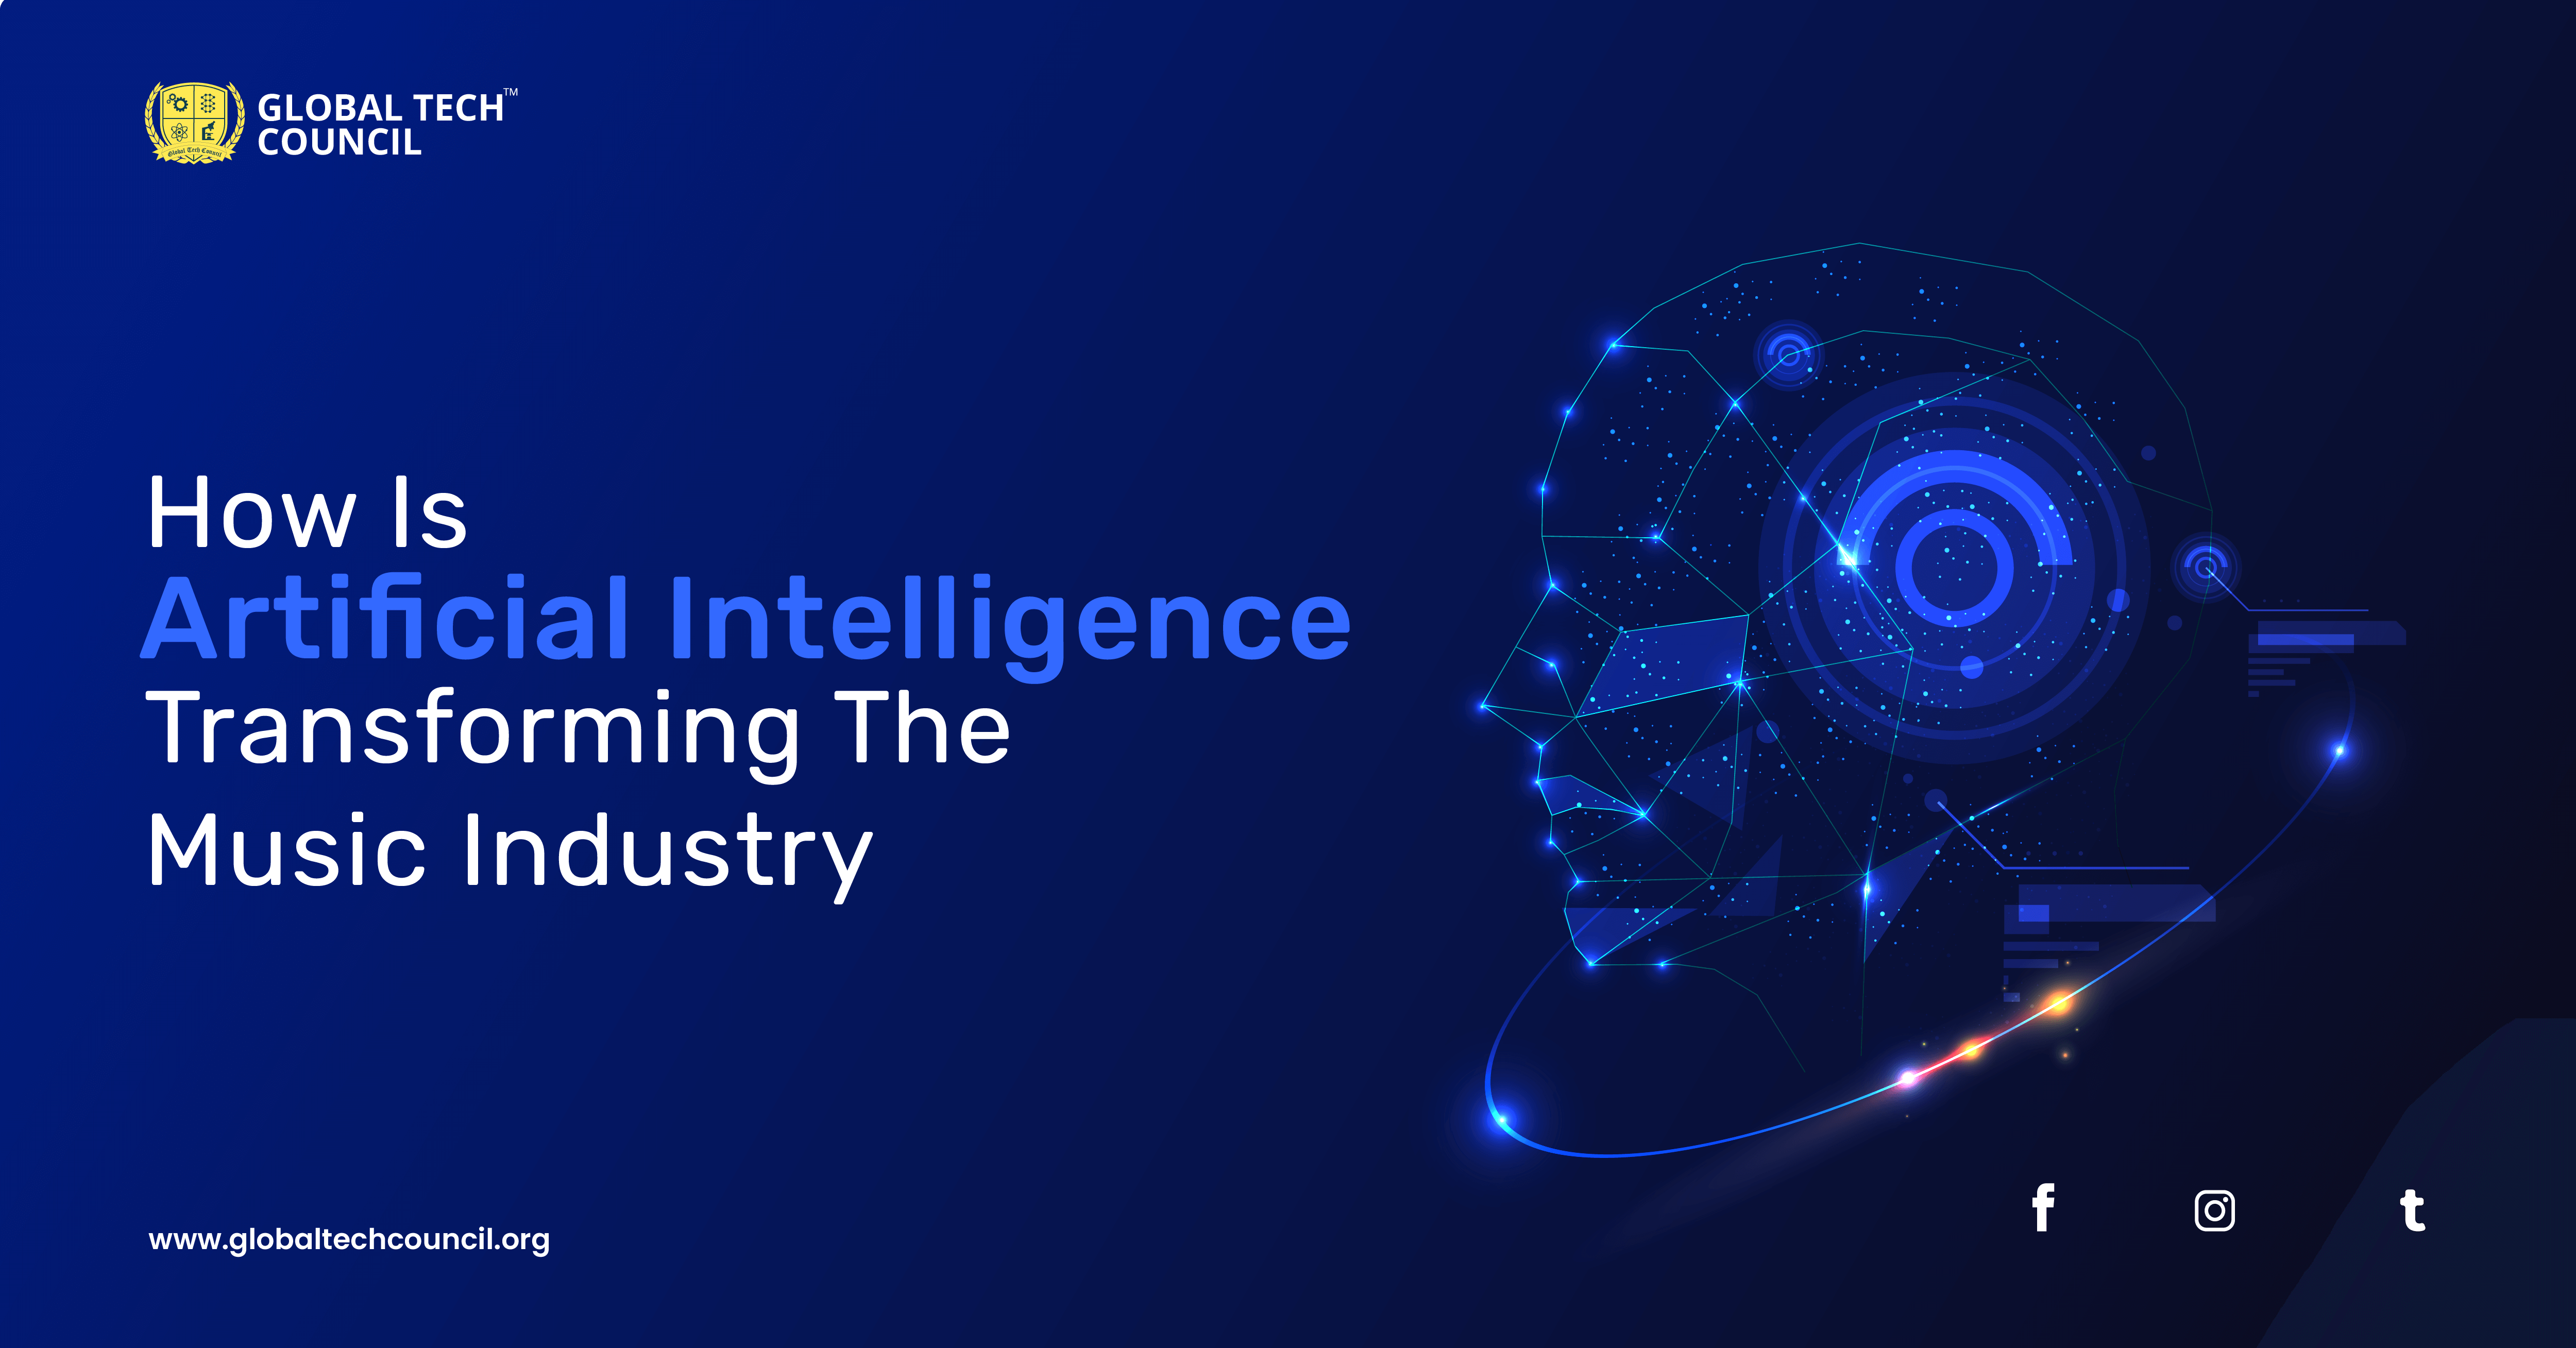 How Is Artificial Intelligence Transforming The Music Industry